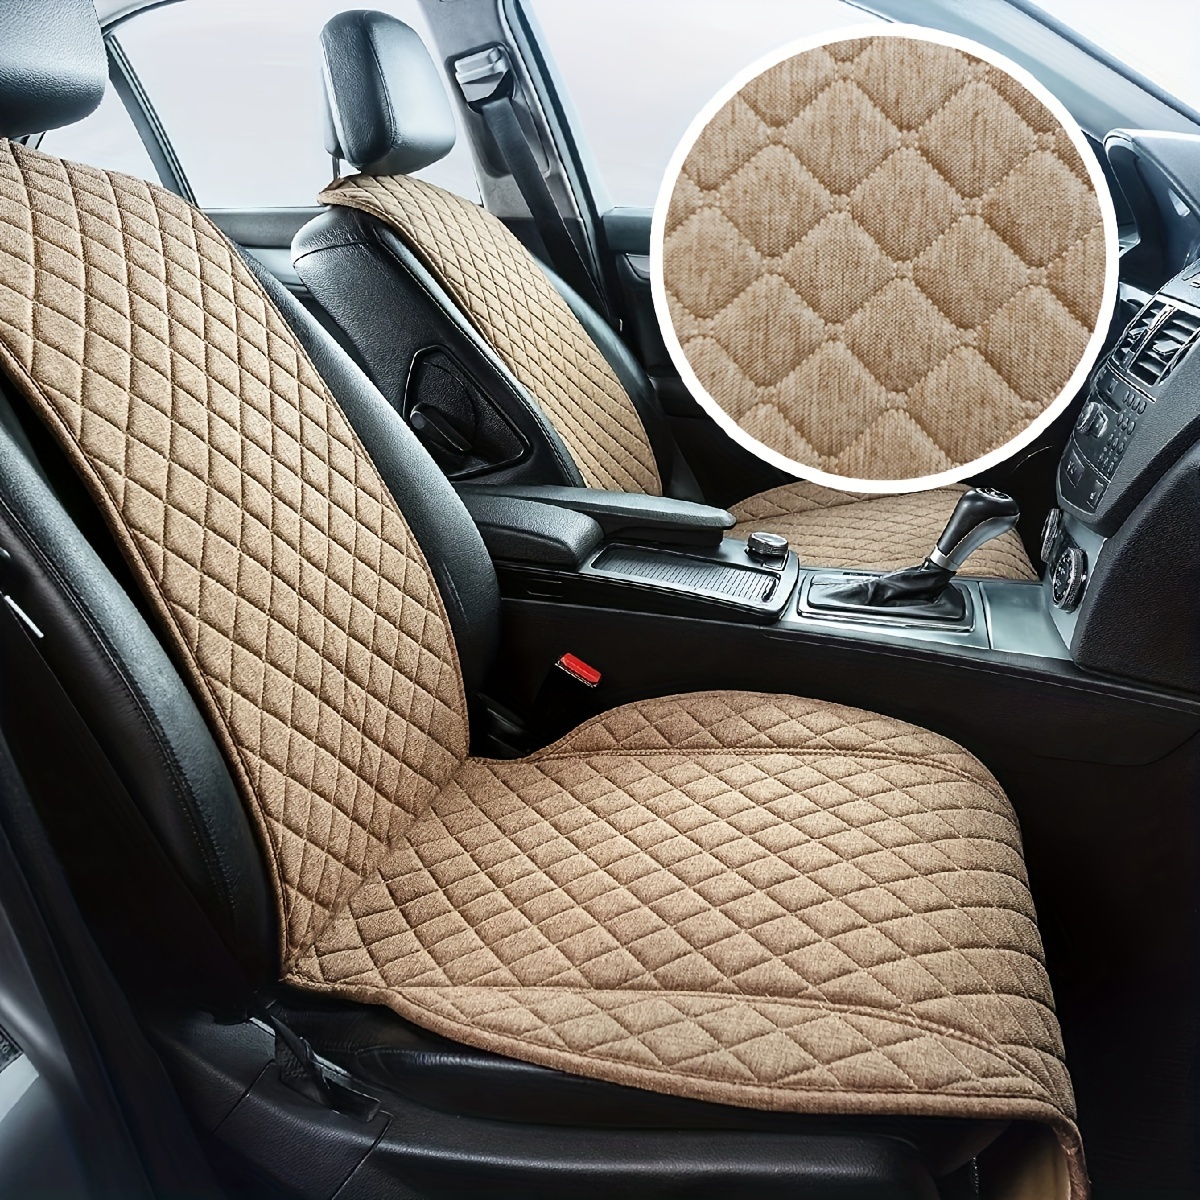 1pc Car Seat Cover, Soft & Breathable Front Premium Covers With Non-Slip  Protector Fits Most Automotive, Van, SUV, Truck